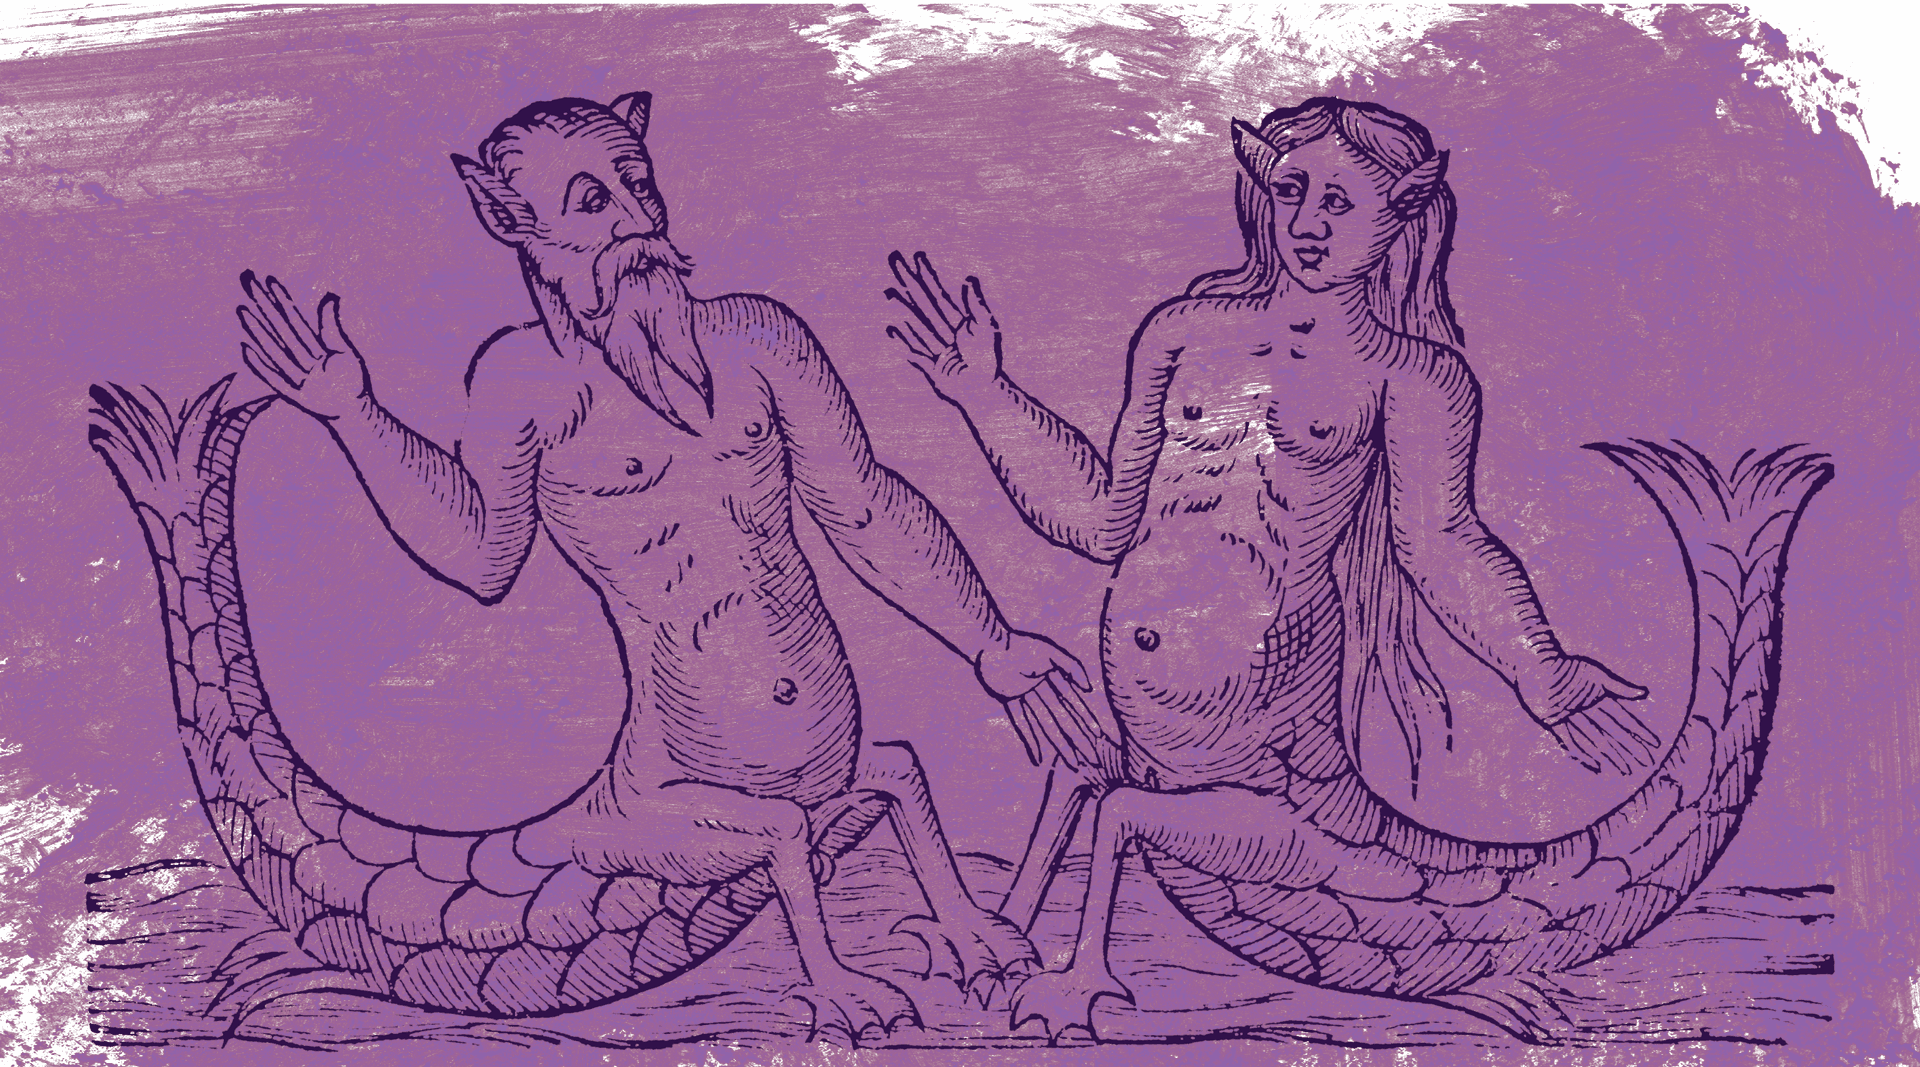 Illustration of two human bodies with pointy years, webbed feet, and mermaid tails floating on water against a purple background